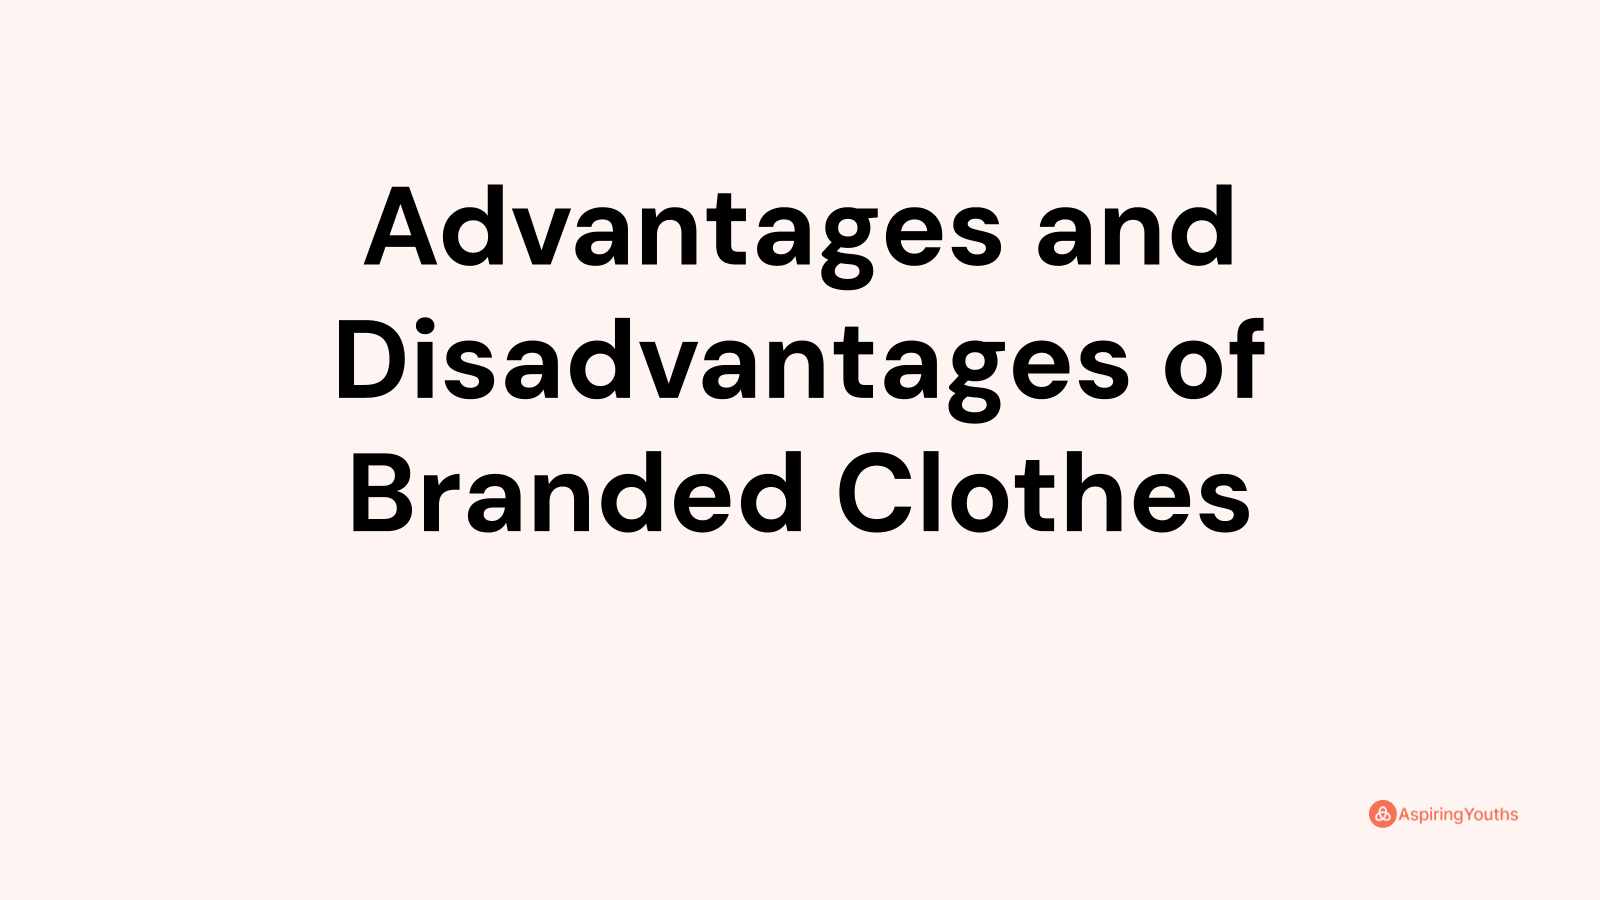 Advantages and disadvantages of Branded Clothes